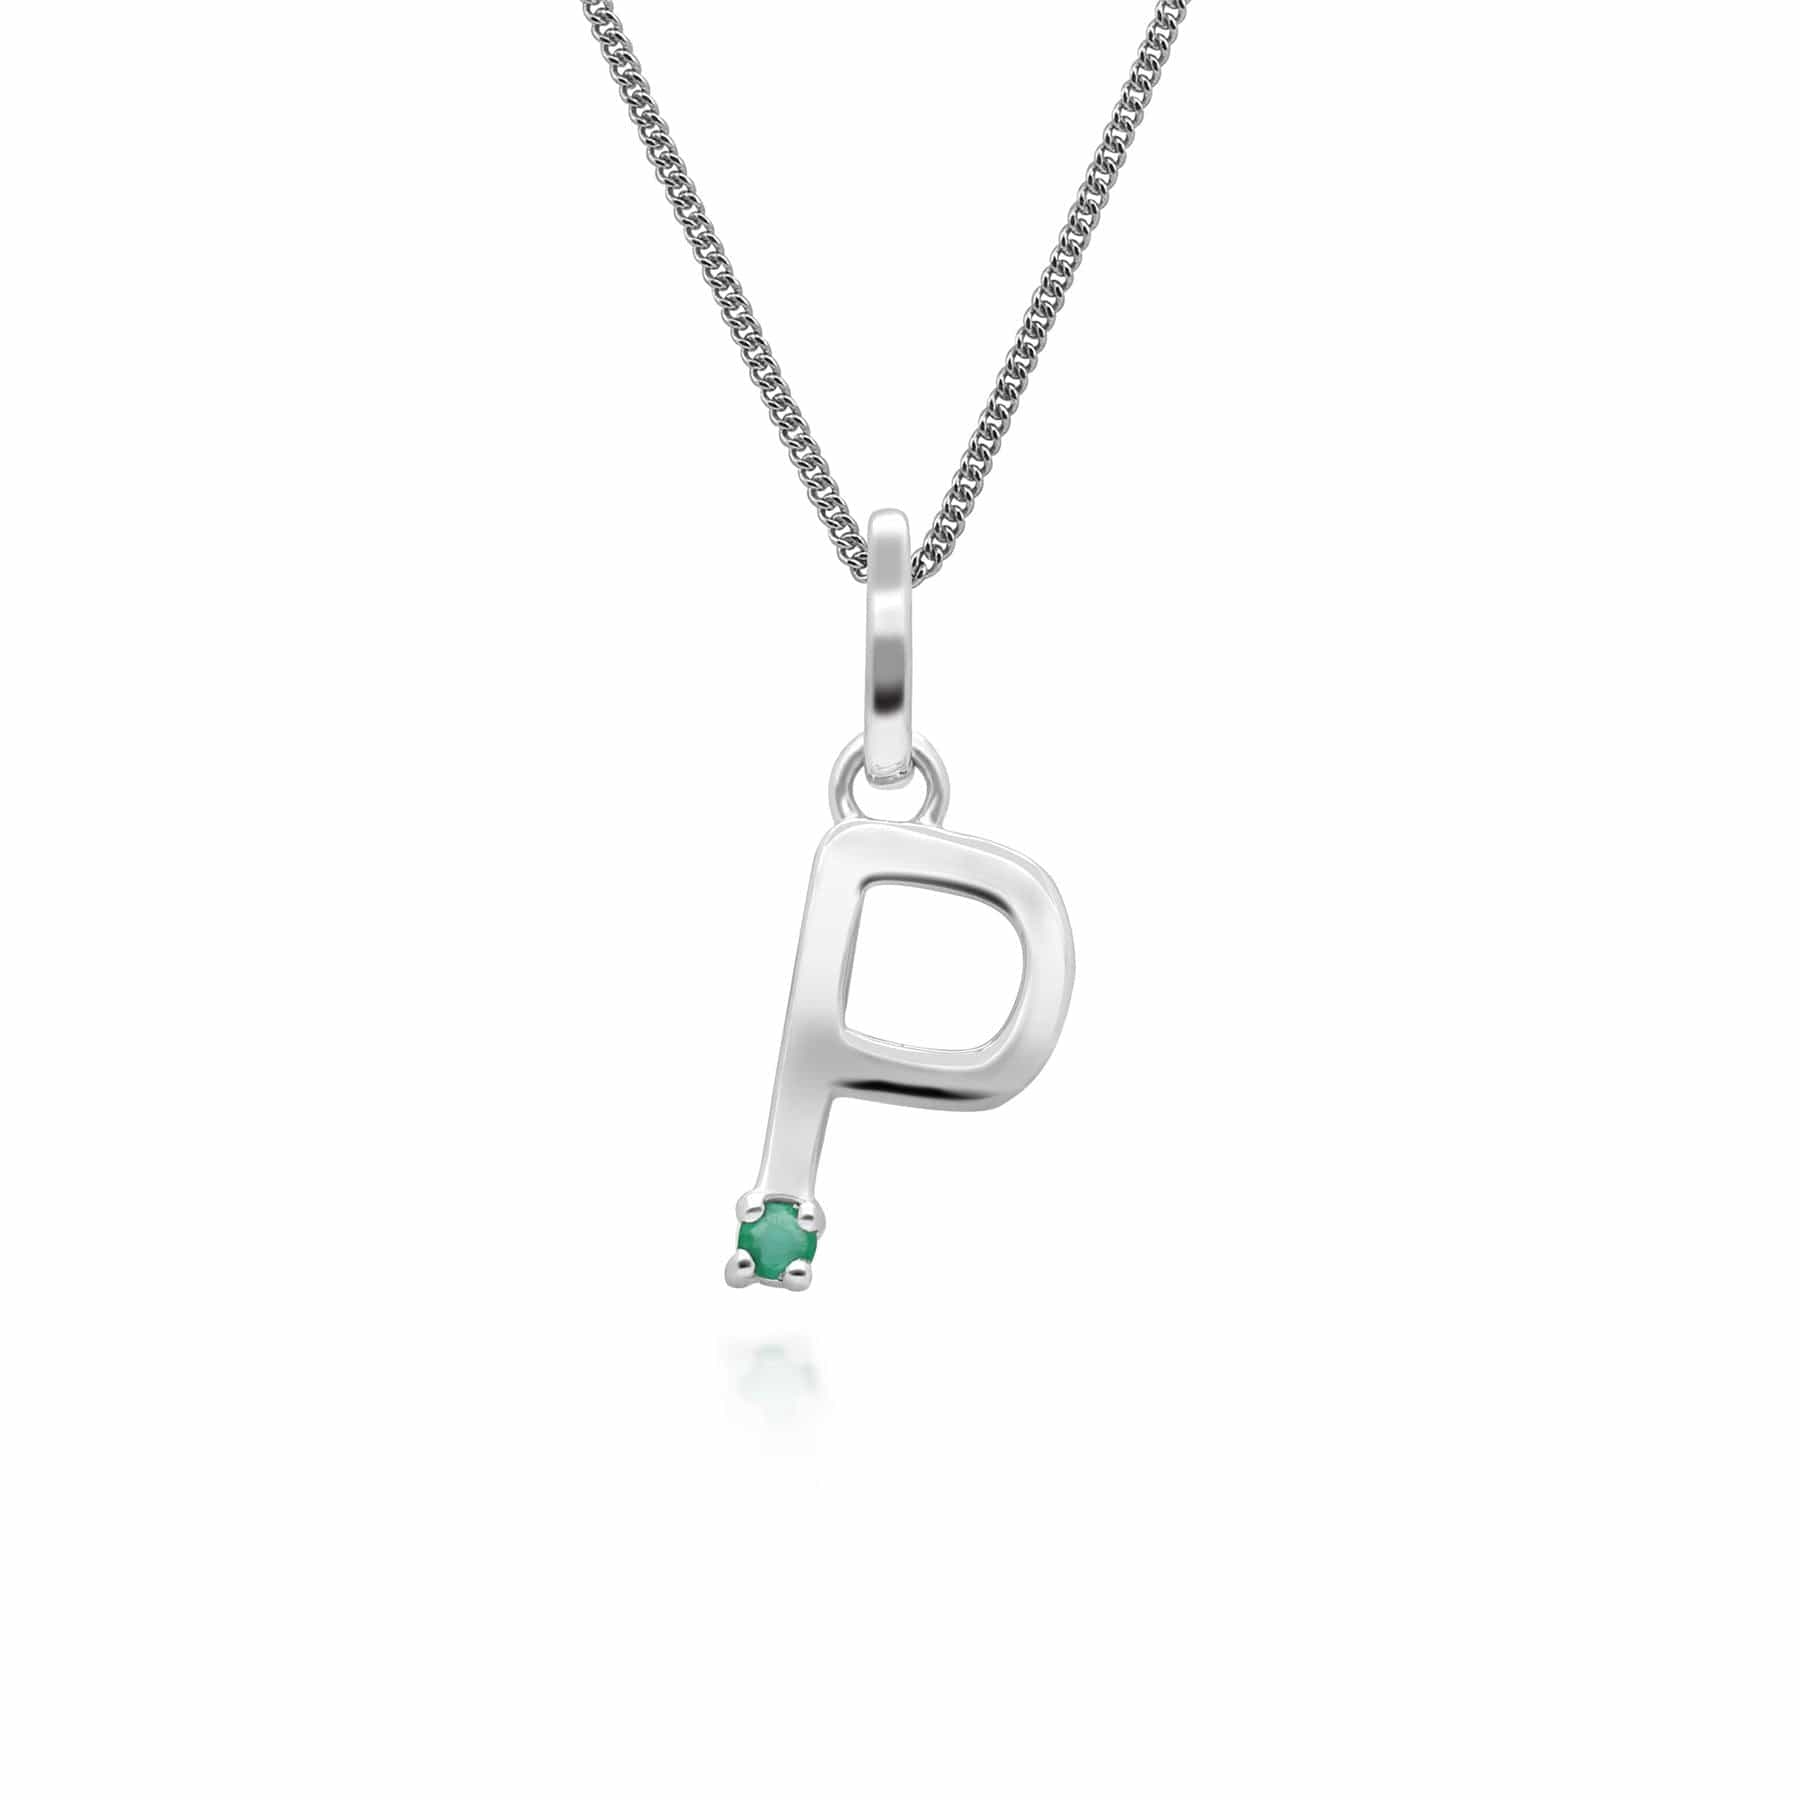 162P0260019 Initial Emerald Letter Charm Necklace in 9ct White Gold 15